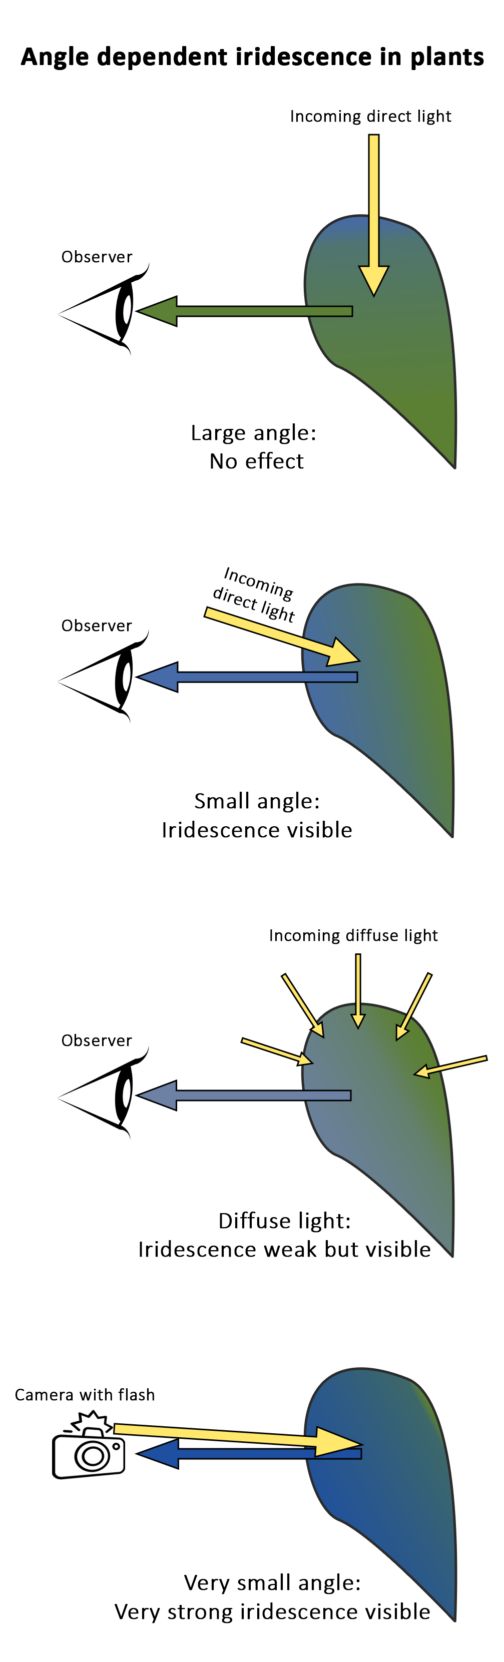 Visible iridescence in plants is usually highly dependent on light conditions. With direct light, the angle from which the light comes must be as small as possible in relation to the observer (eye or camera) in order to see iridescence. In diffuse light, the eye can see a faint iridescence from a bigger angle. Iridescence is strongest in a camera with a flash because the angle is small and the stray light is low.